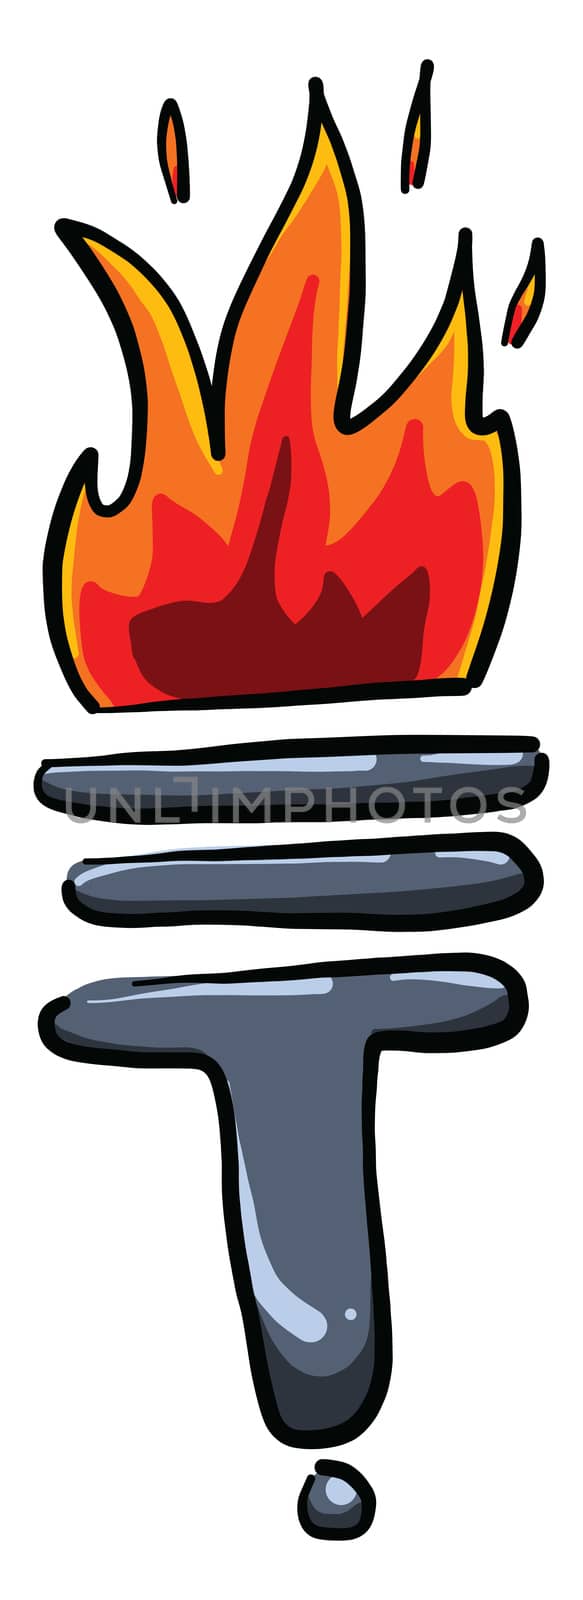 Flame from torch , illustration, vector on white background